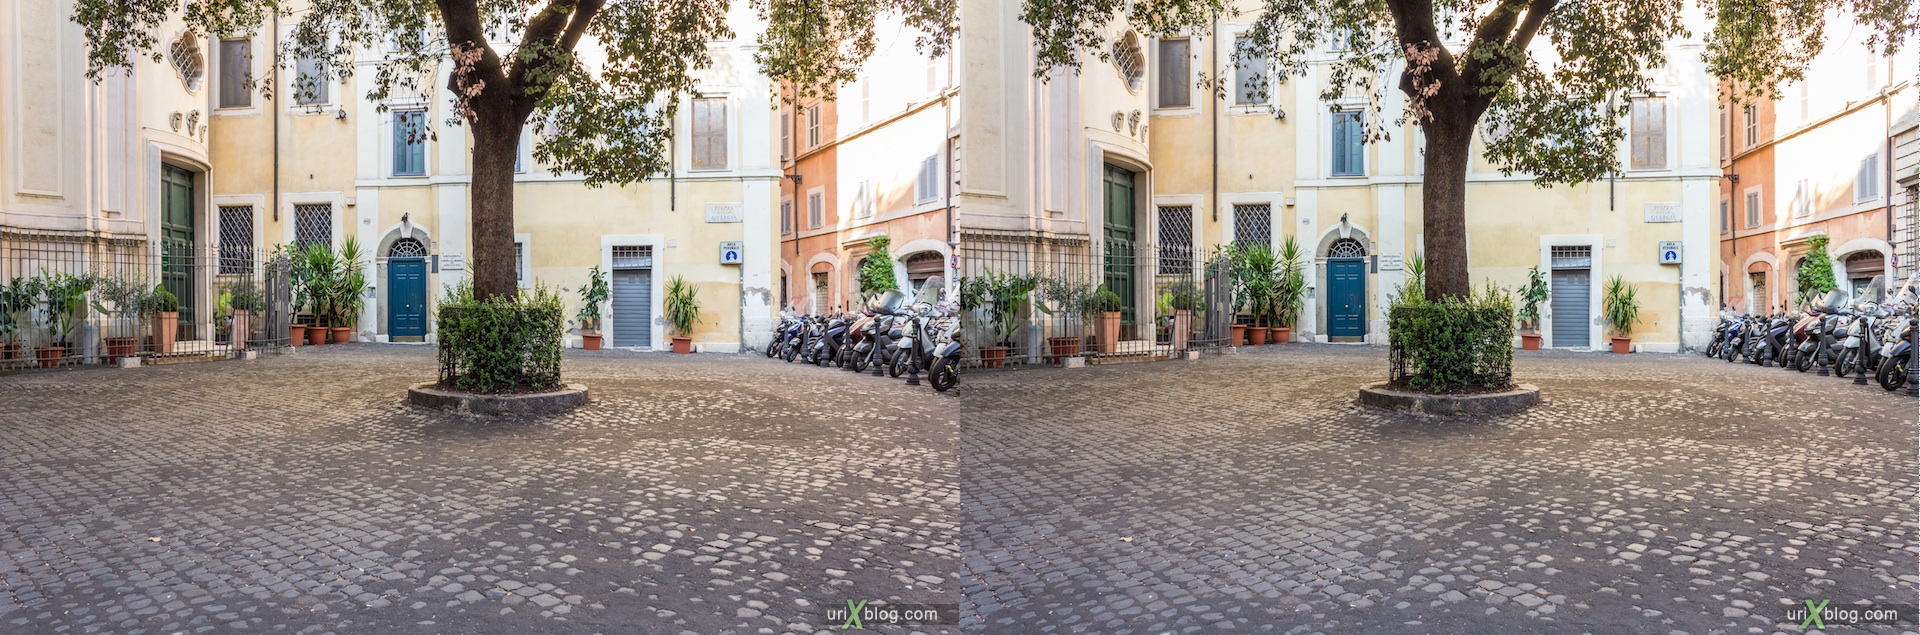 2012, piazza della Quercia square, 3D, stereo pair, cross-eyed, crossview, cross view stereo pair